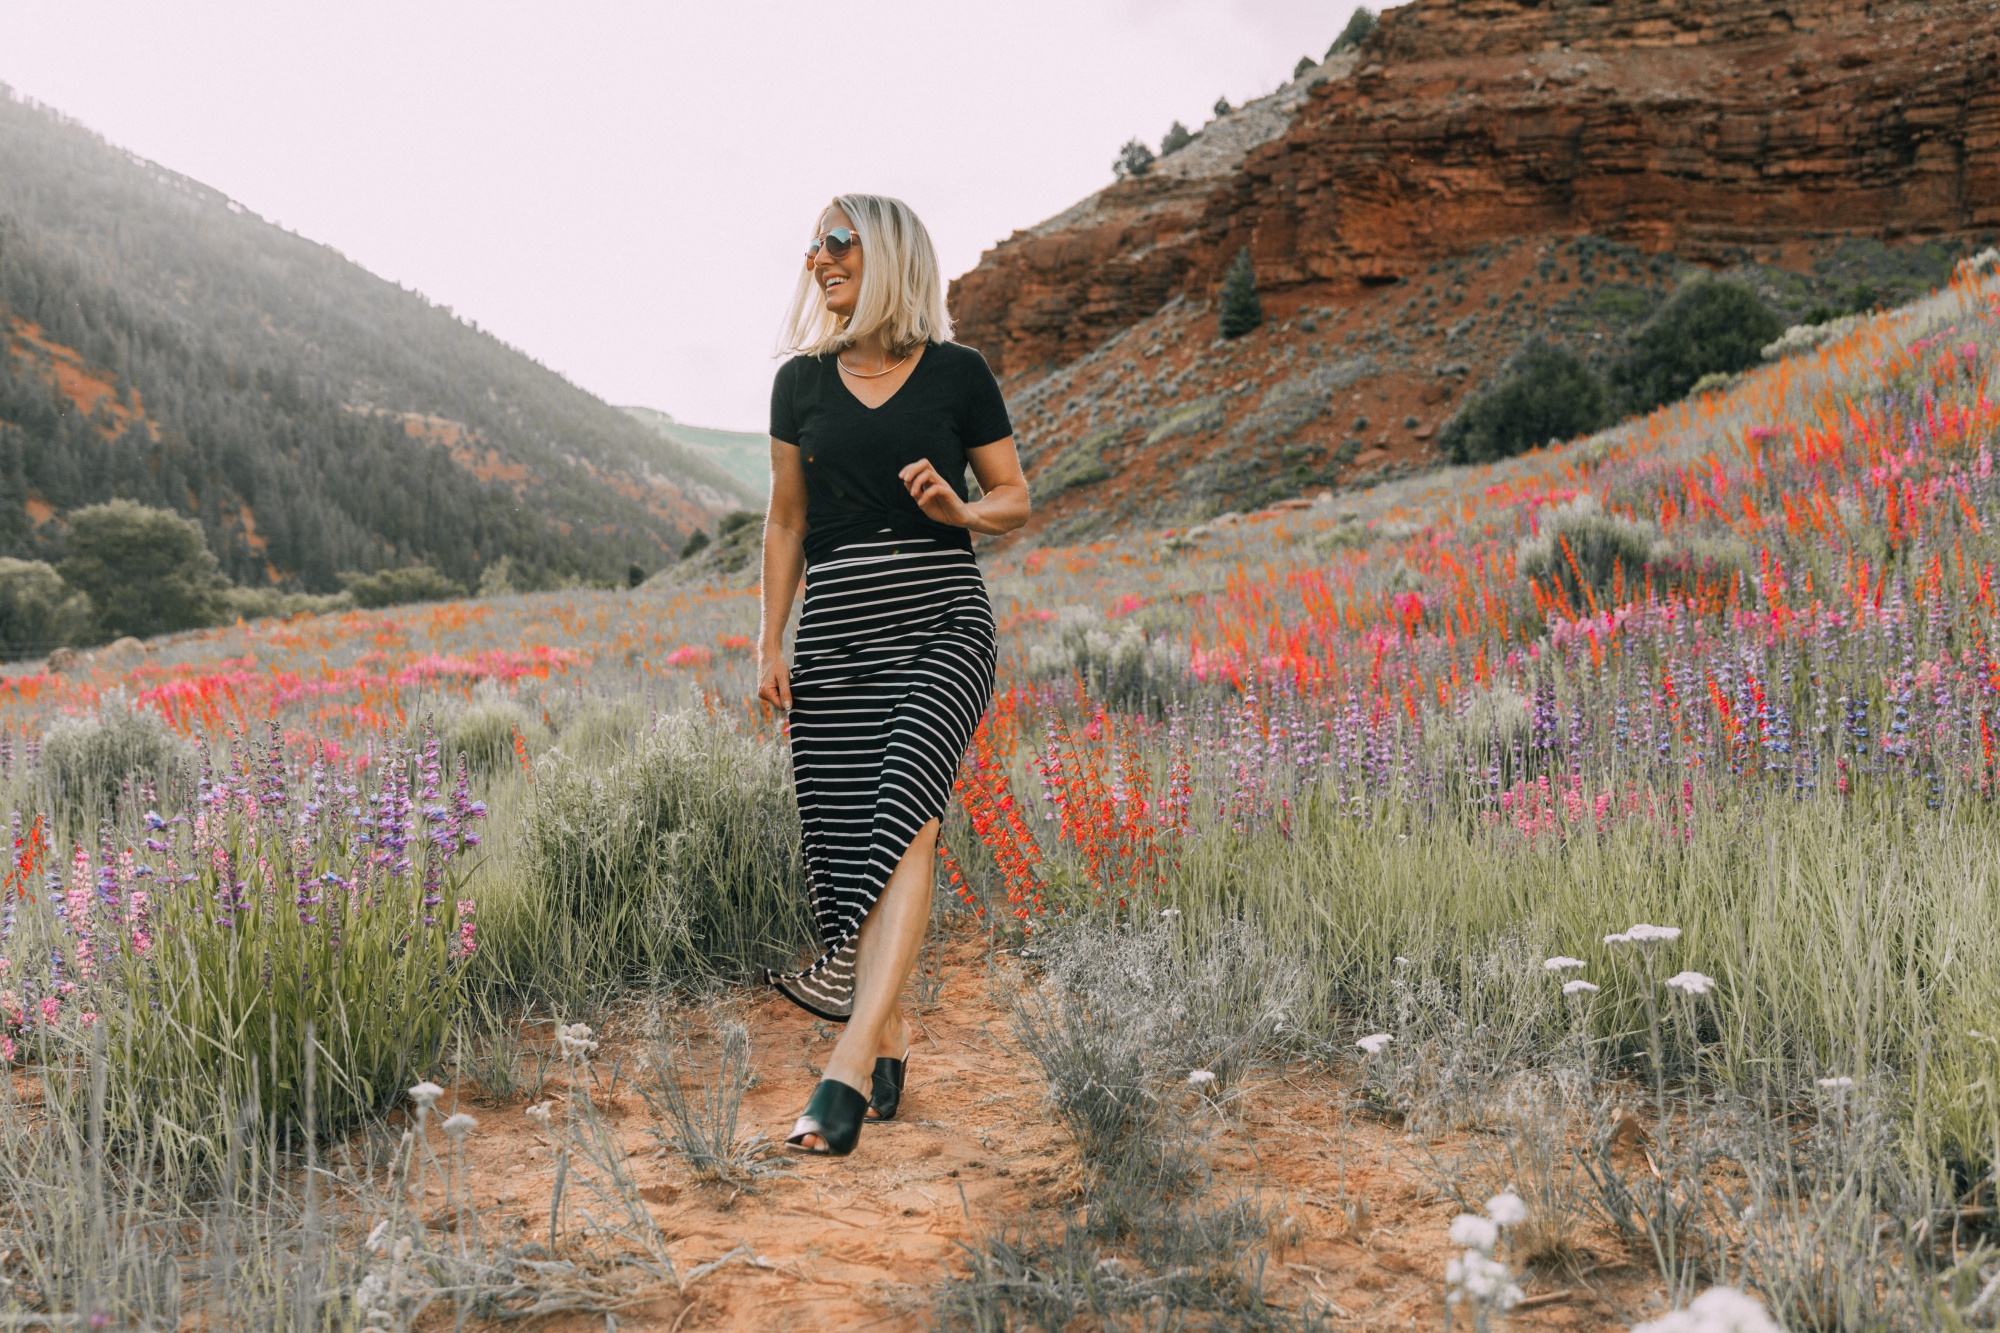 Ways To Wear Stripes, Fashion blogger Erin Busbee of BusbeeStyle.com wearing a striped maxi skirt and black tee from JCPenney with black peep toe mules by Liz Claiborne in the wildflowers in Telluride, CO